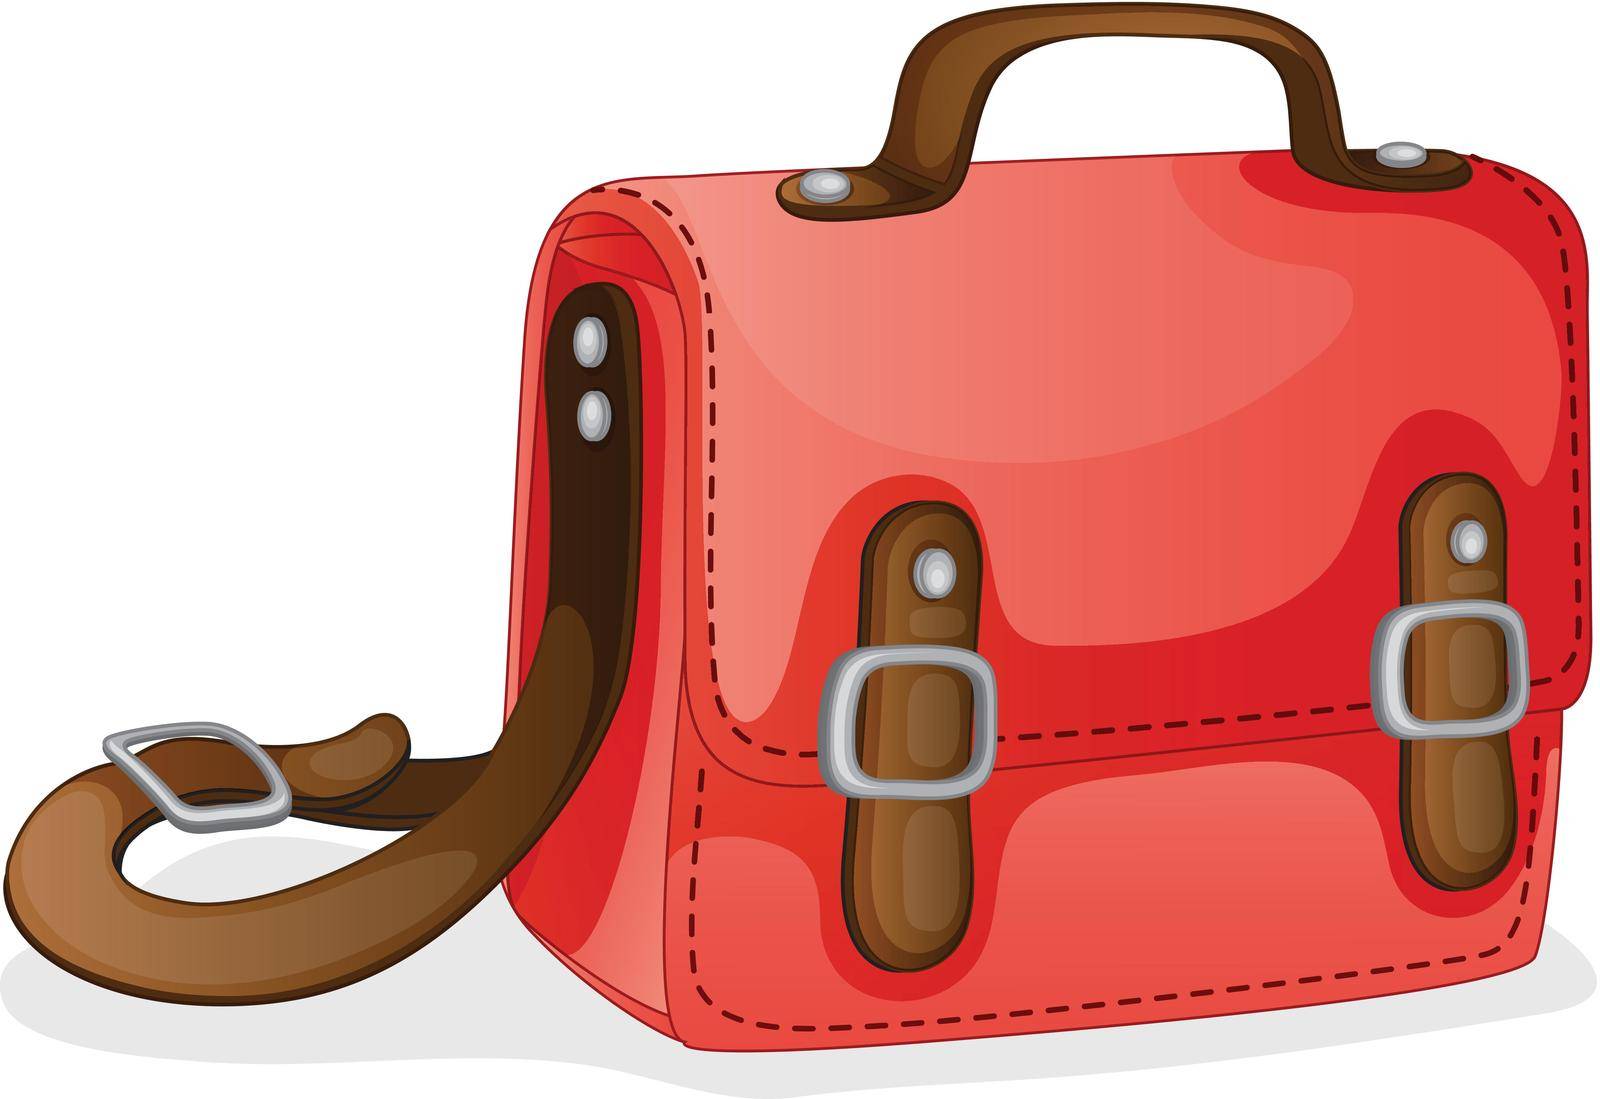 illustration of a red bag on a white background